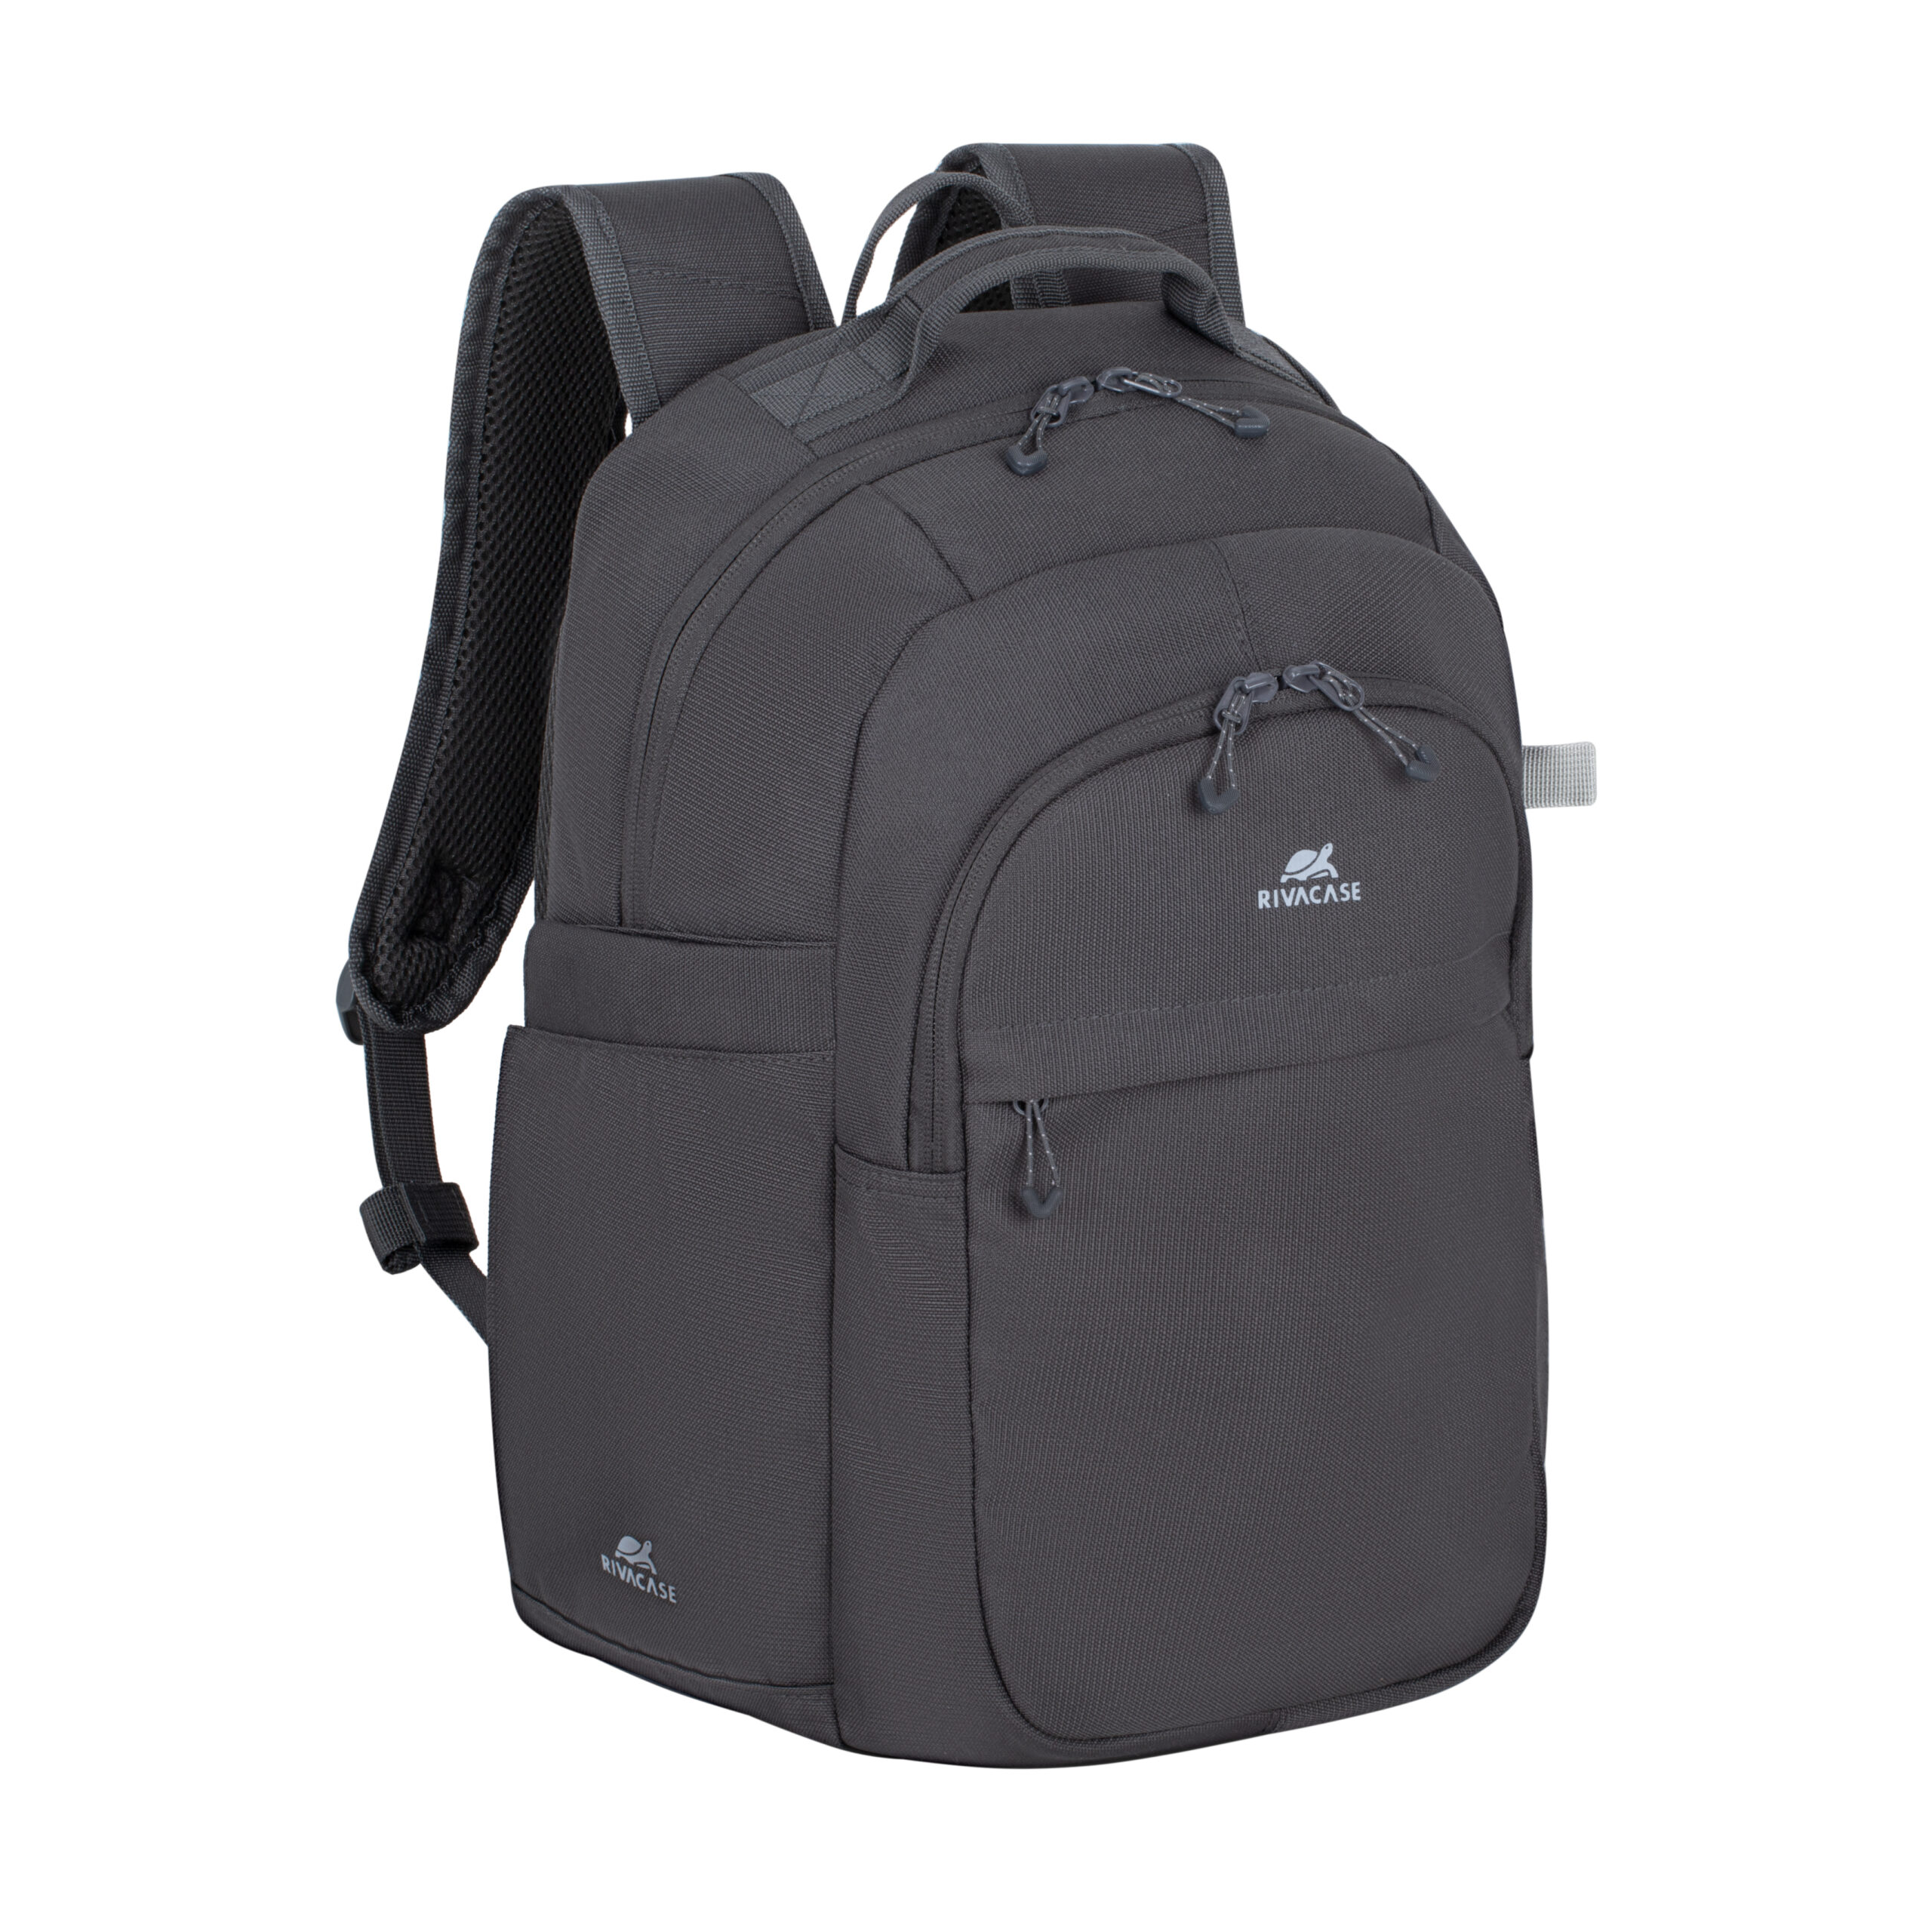 RIVACASE 5432 grey Urban backpack 16L